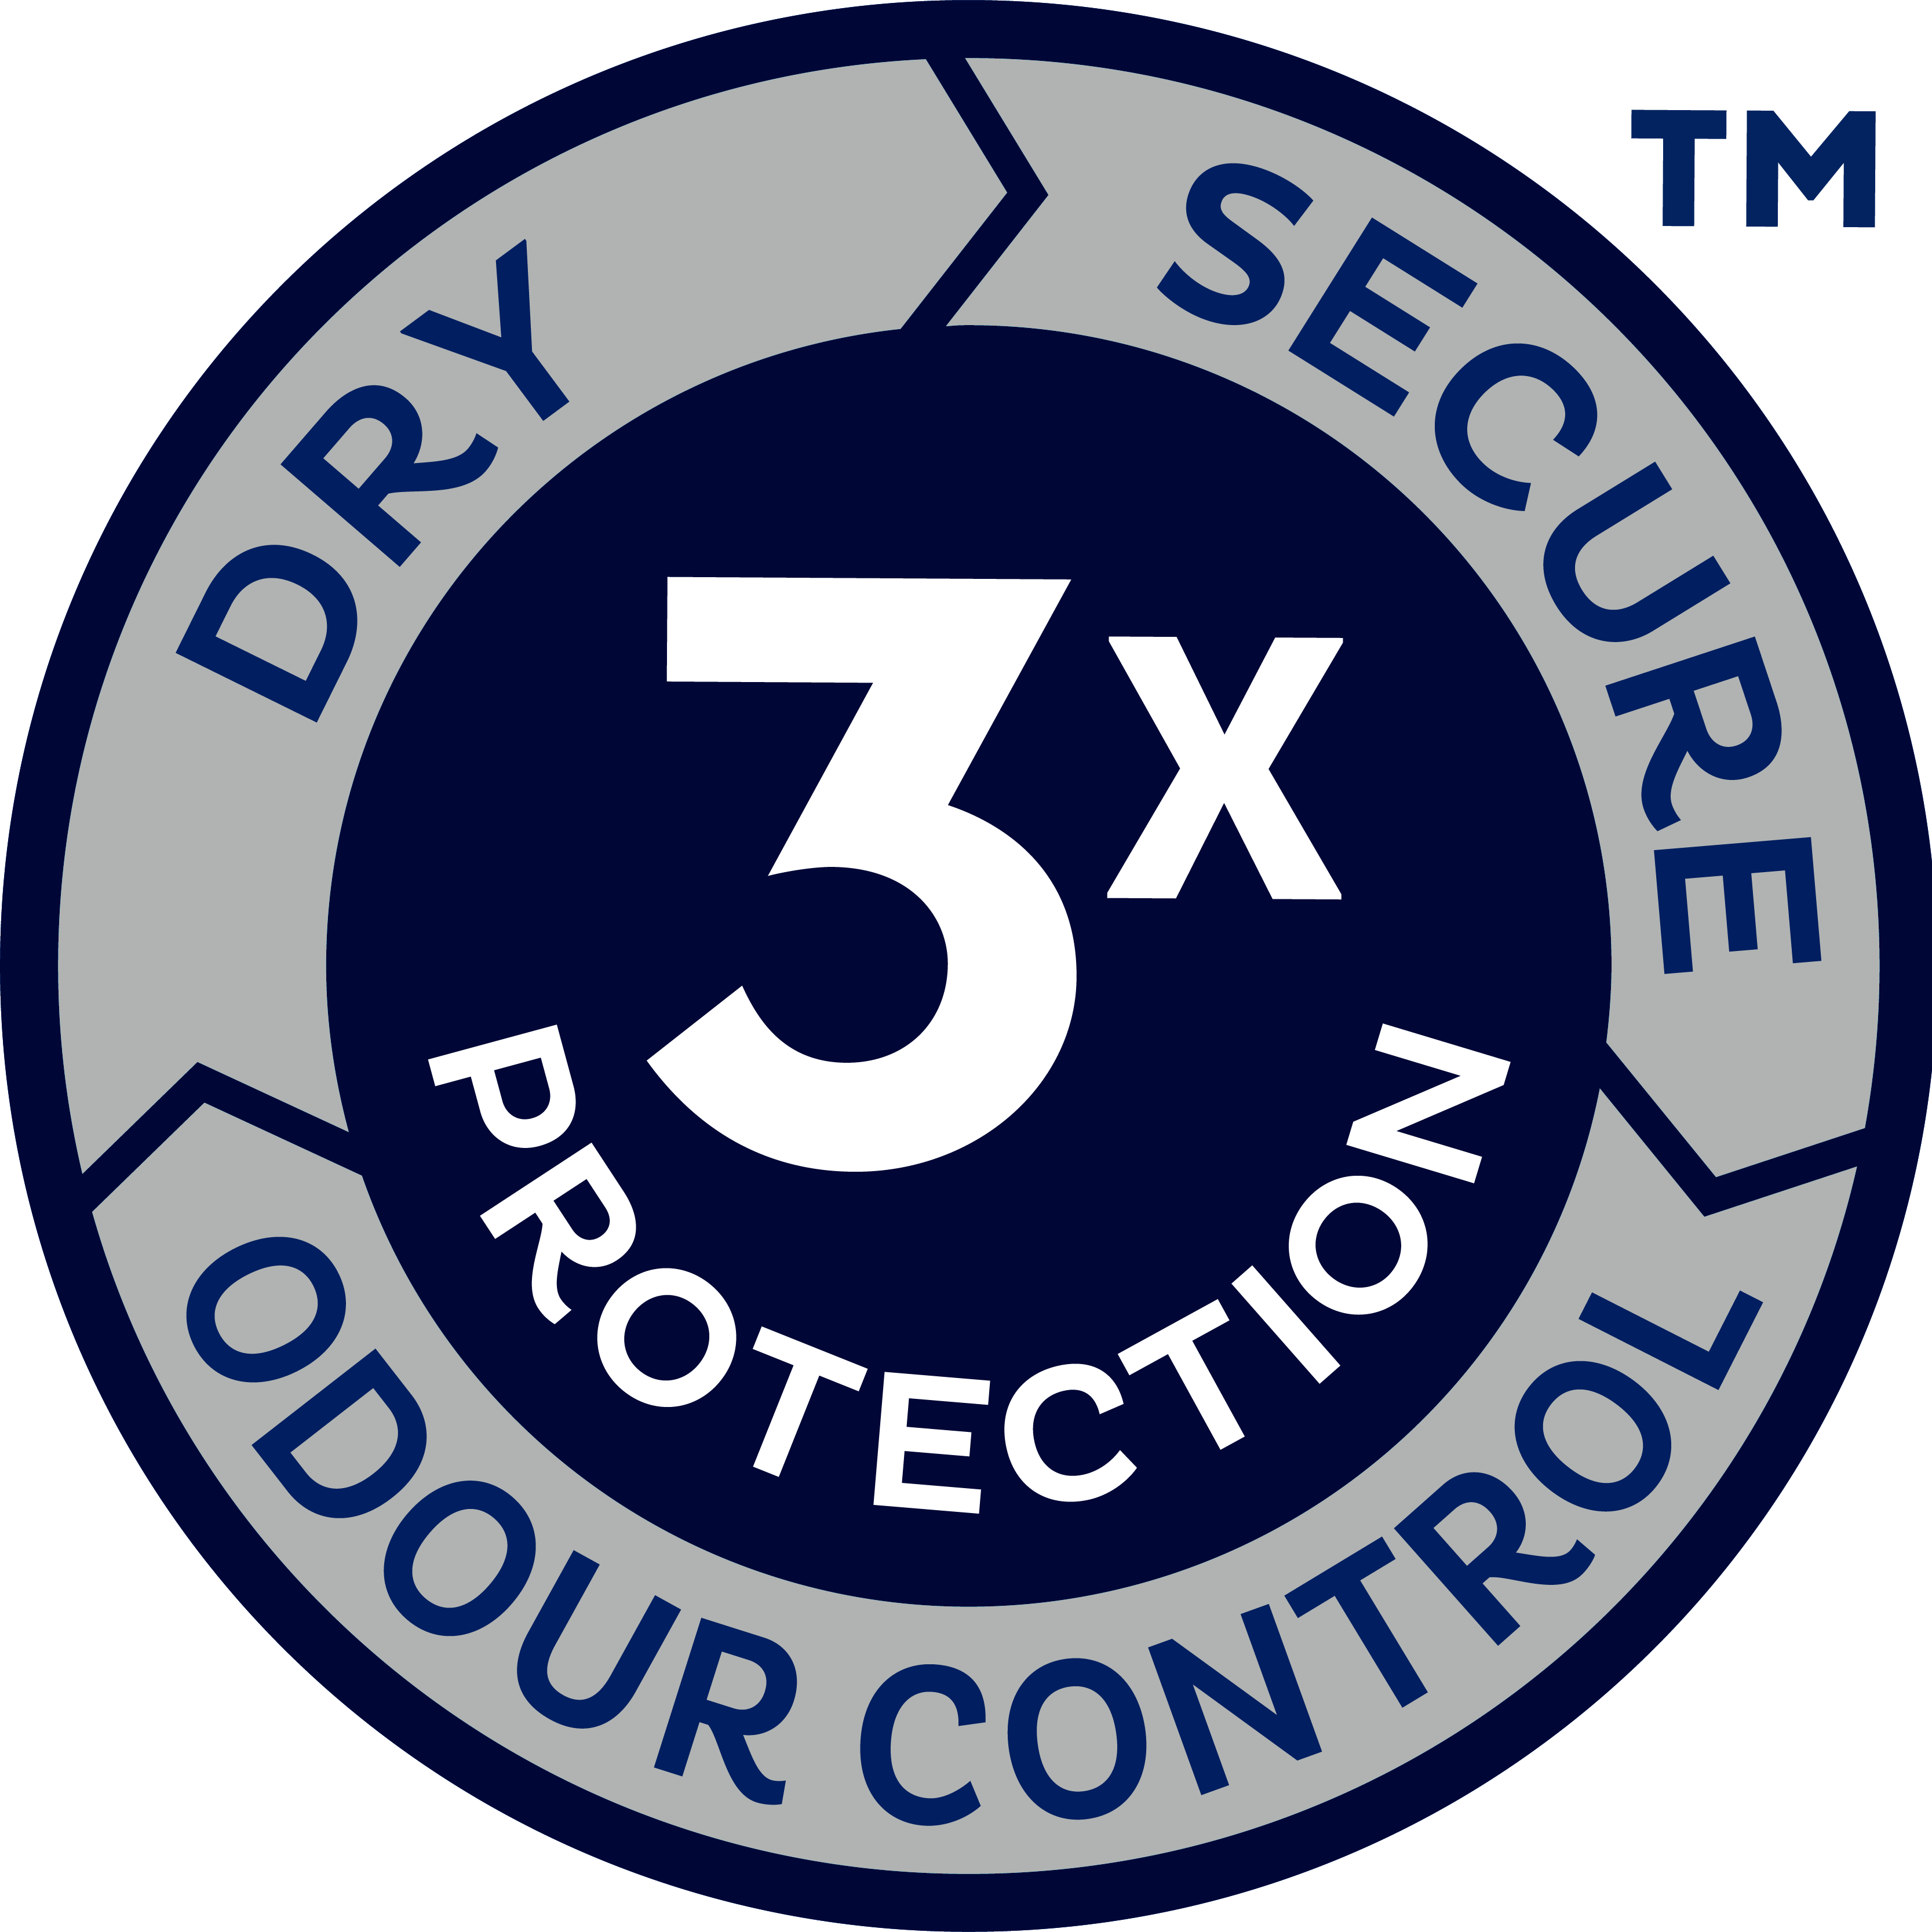 Triple Protection from leaks, odour and moisture.